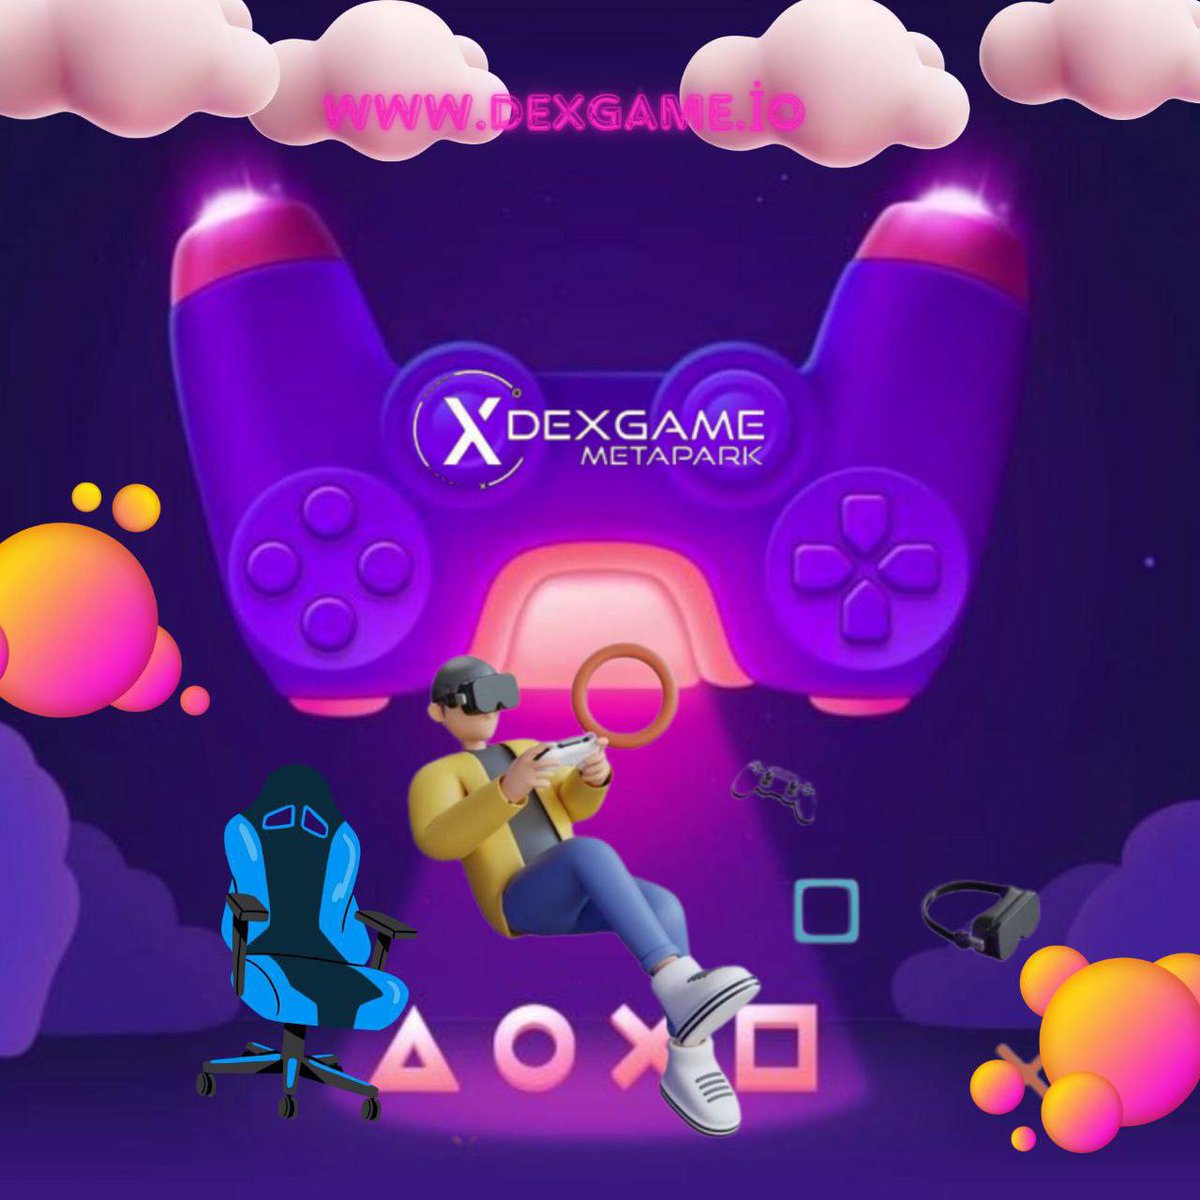 The metaverse concept behind DEXGame is inclusive and welcoming to all types of gaming enthusiasts.
#oxro 😉 #dxgm 💥 #dexgame 🍀